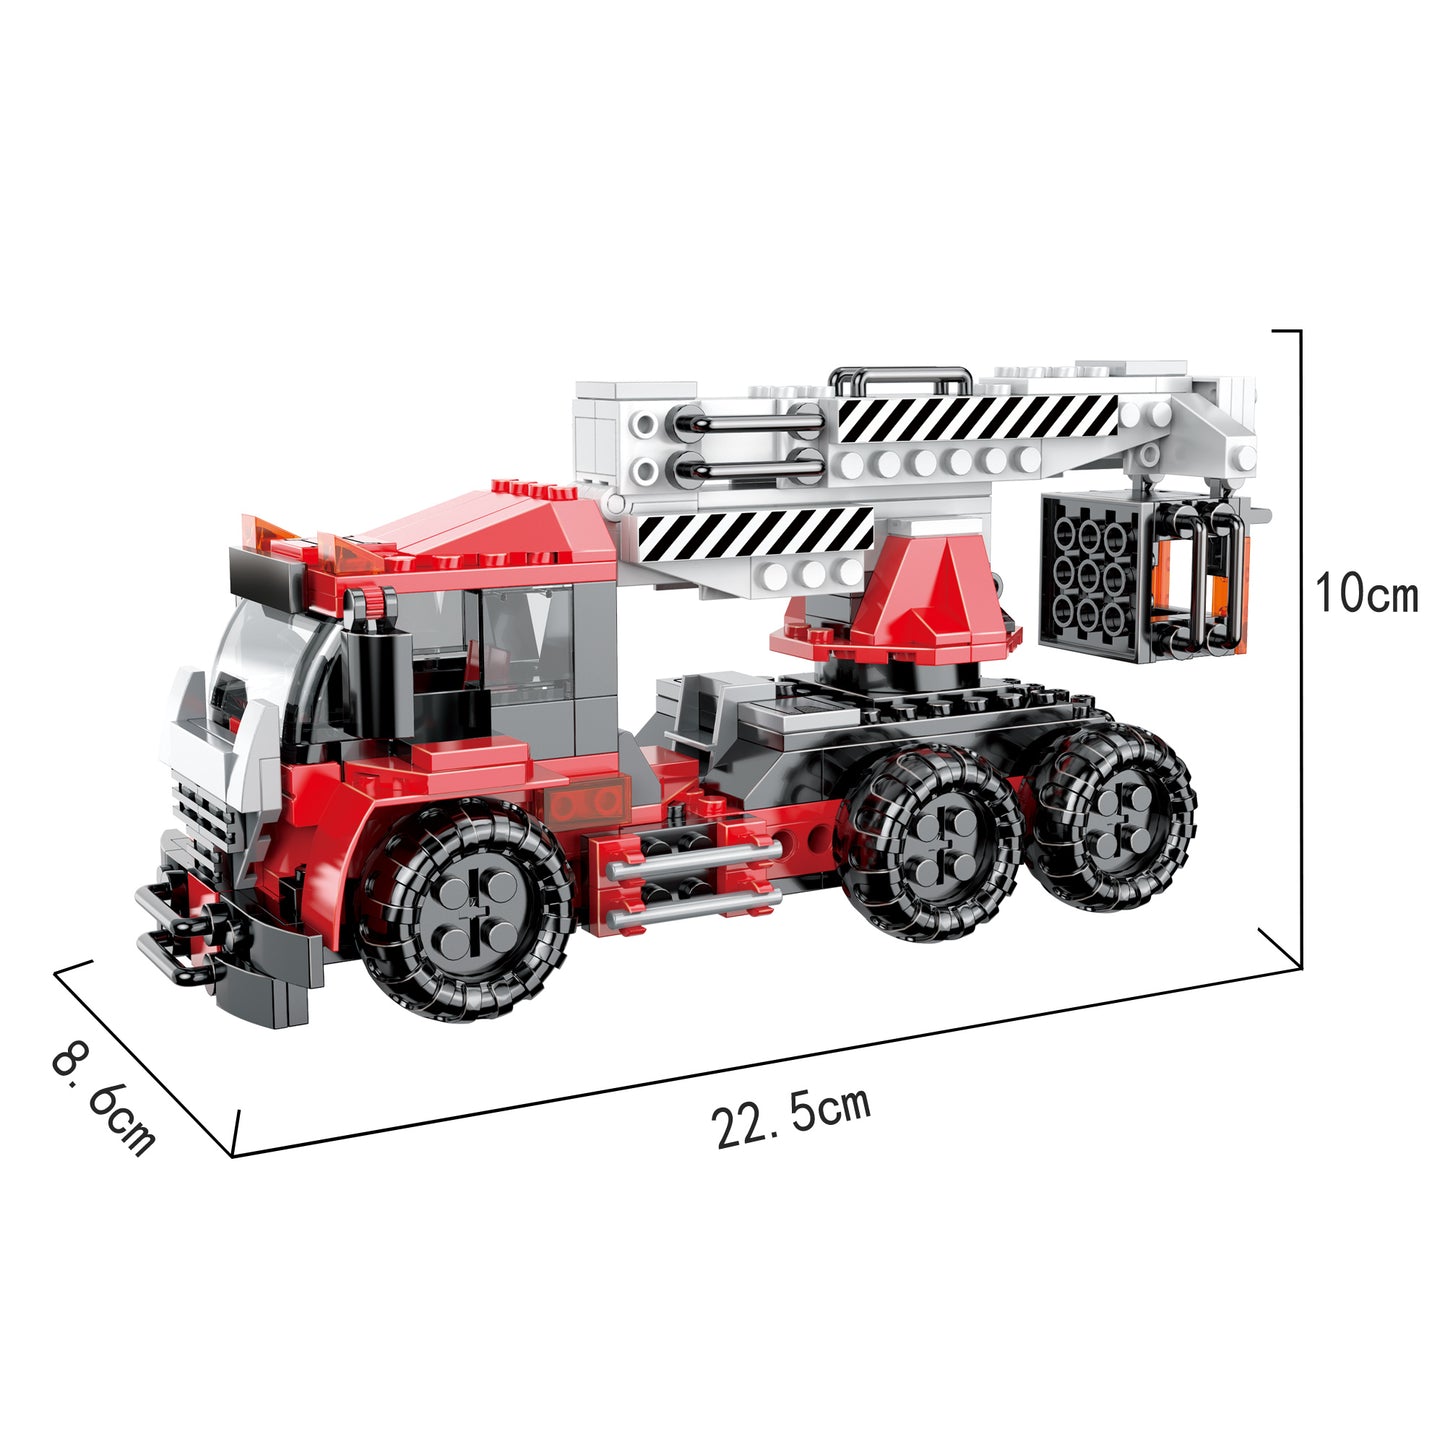 3-in-1 Construction Truck